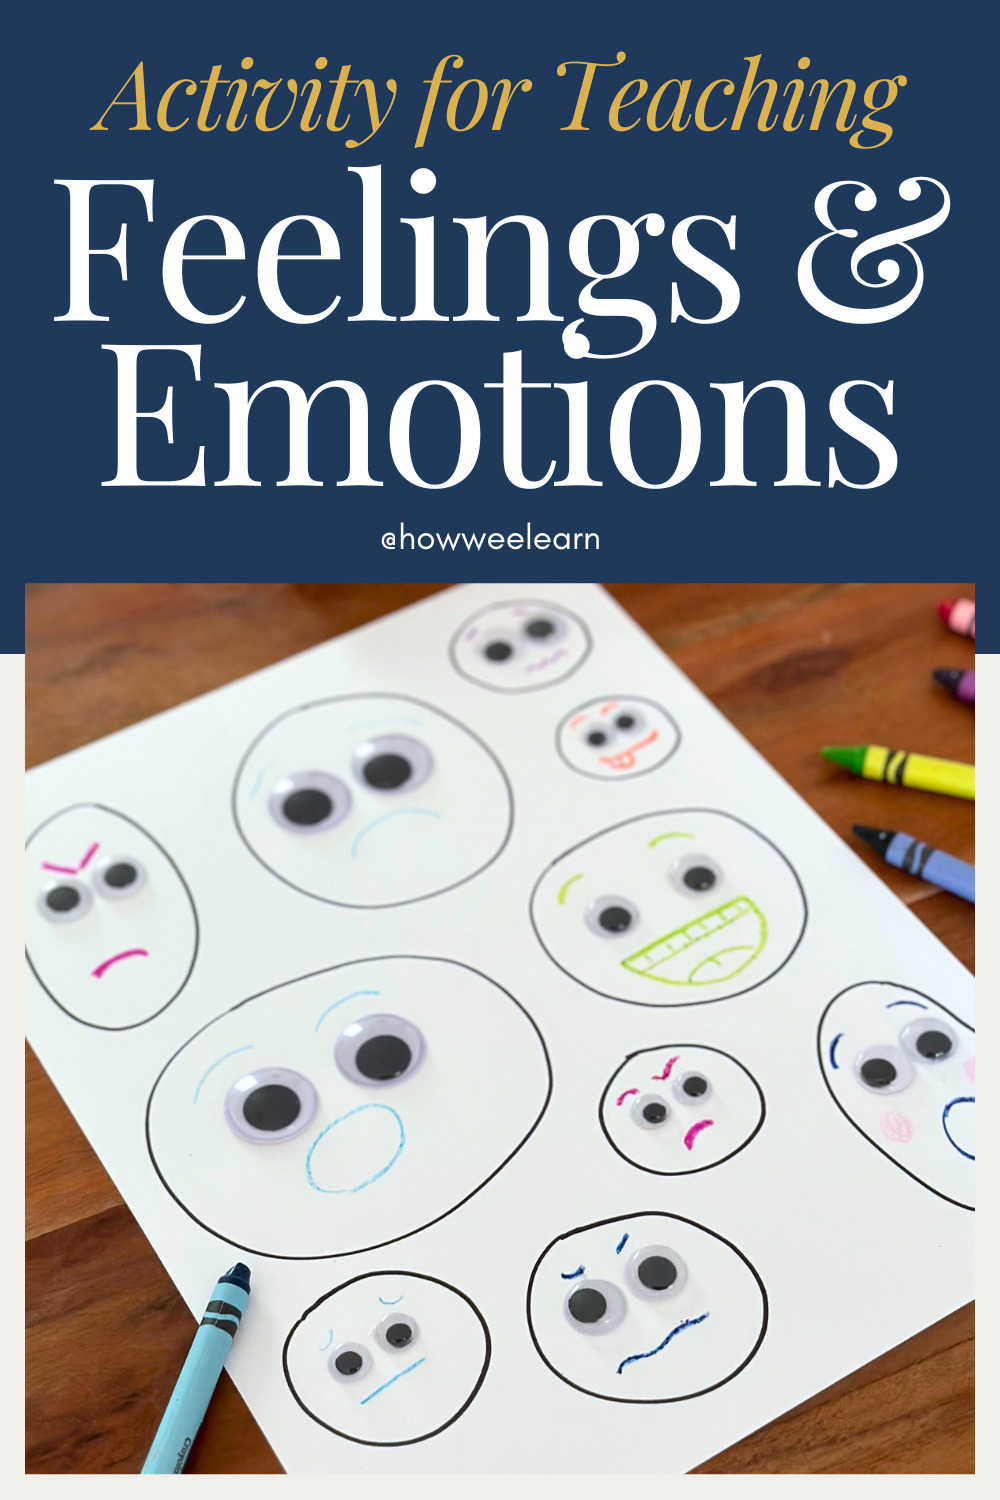 Activity for Teaching Feelings and Emotions - Googly eyes on a piece of white paper with different faces drawn around them